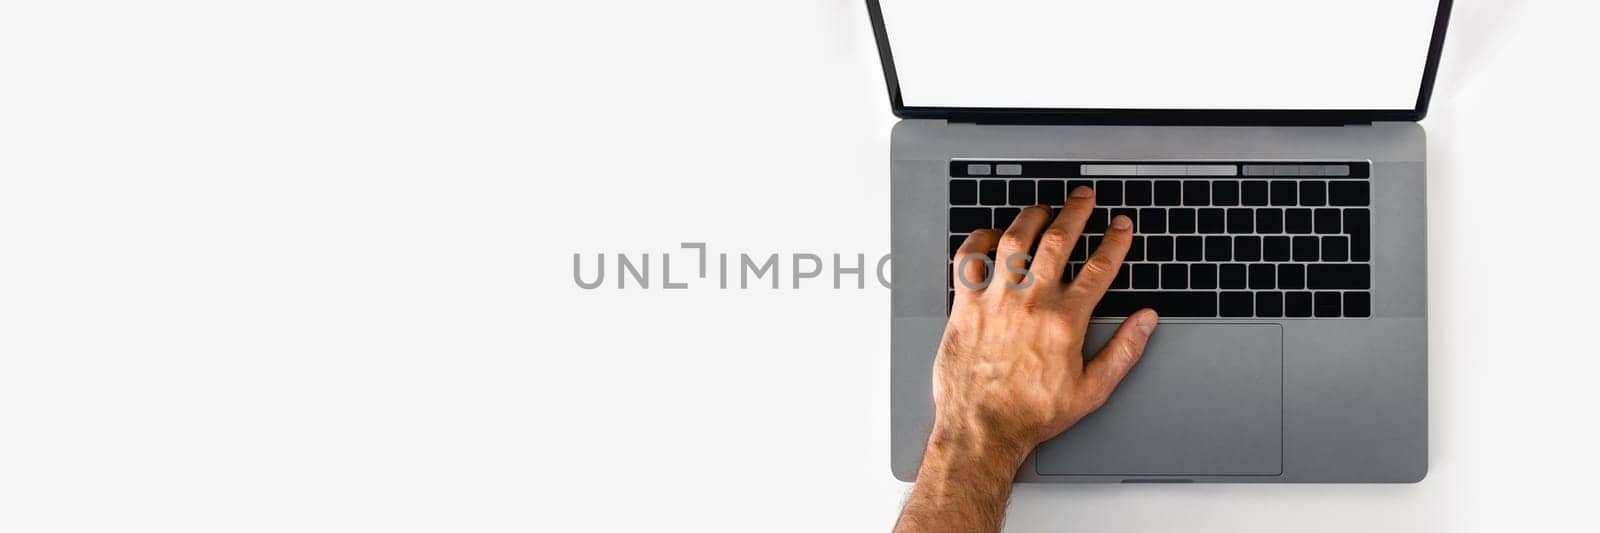 Web banner with man hand working at laptop on white table.